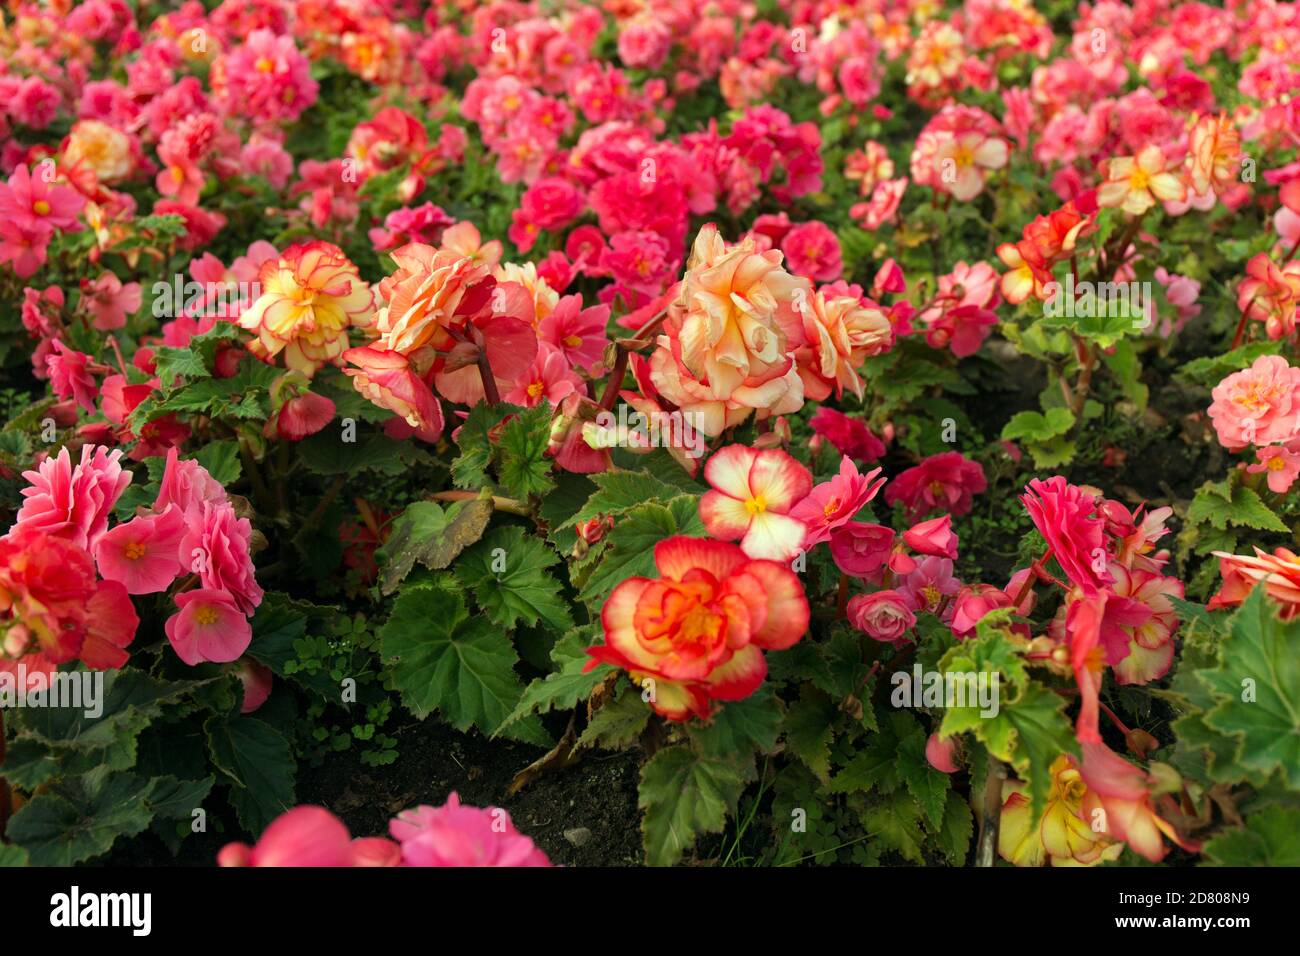 Pink and yellow beautiful begonia flowers field texture. Close up floral background. Stock Photo